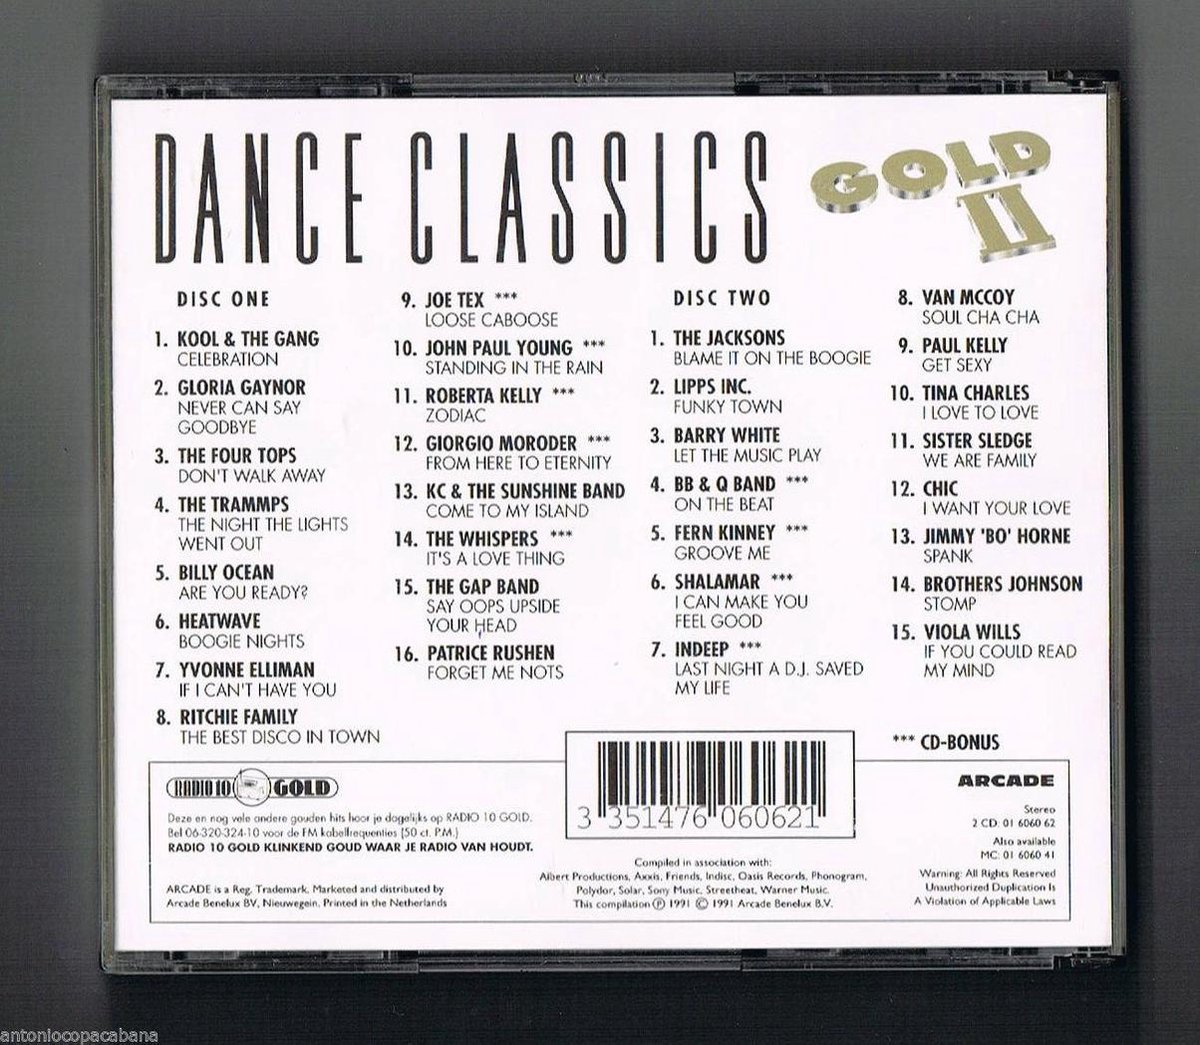 The classic collection CD 1-90-